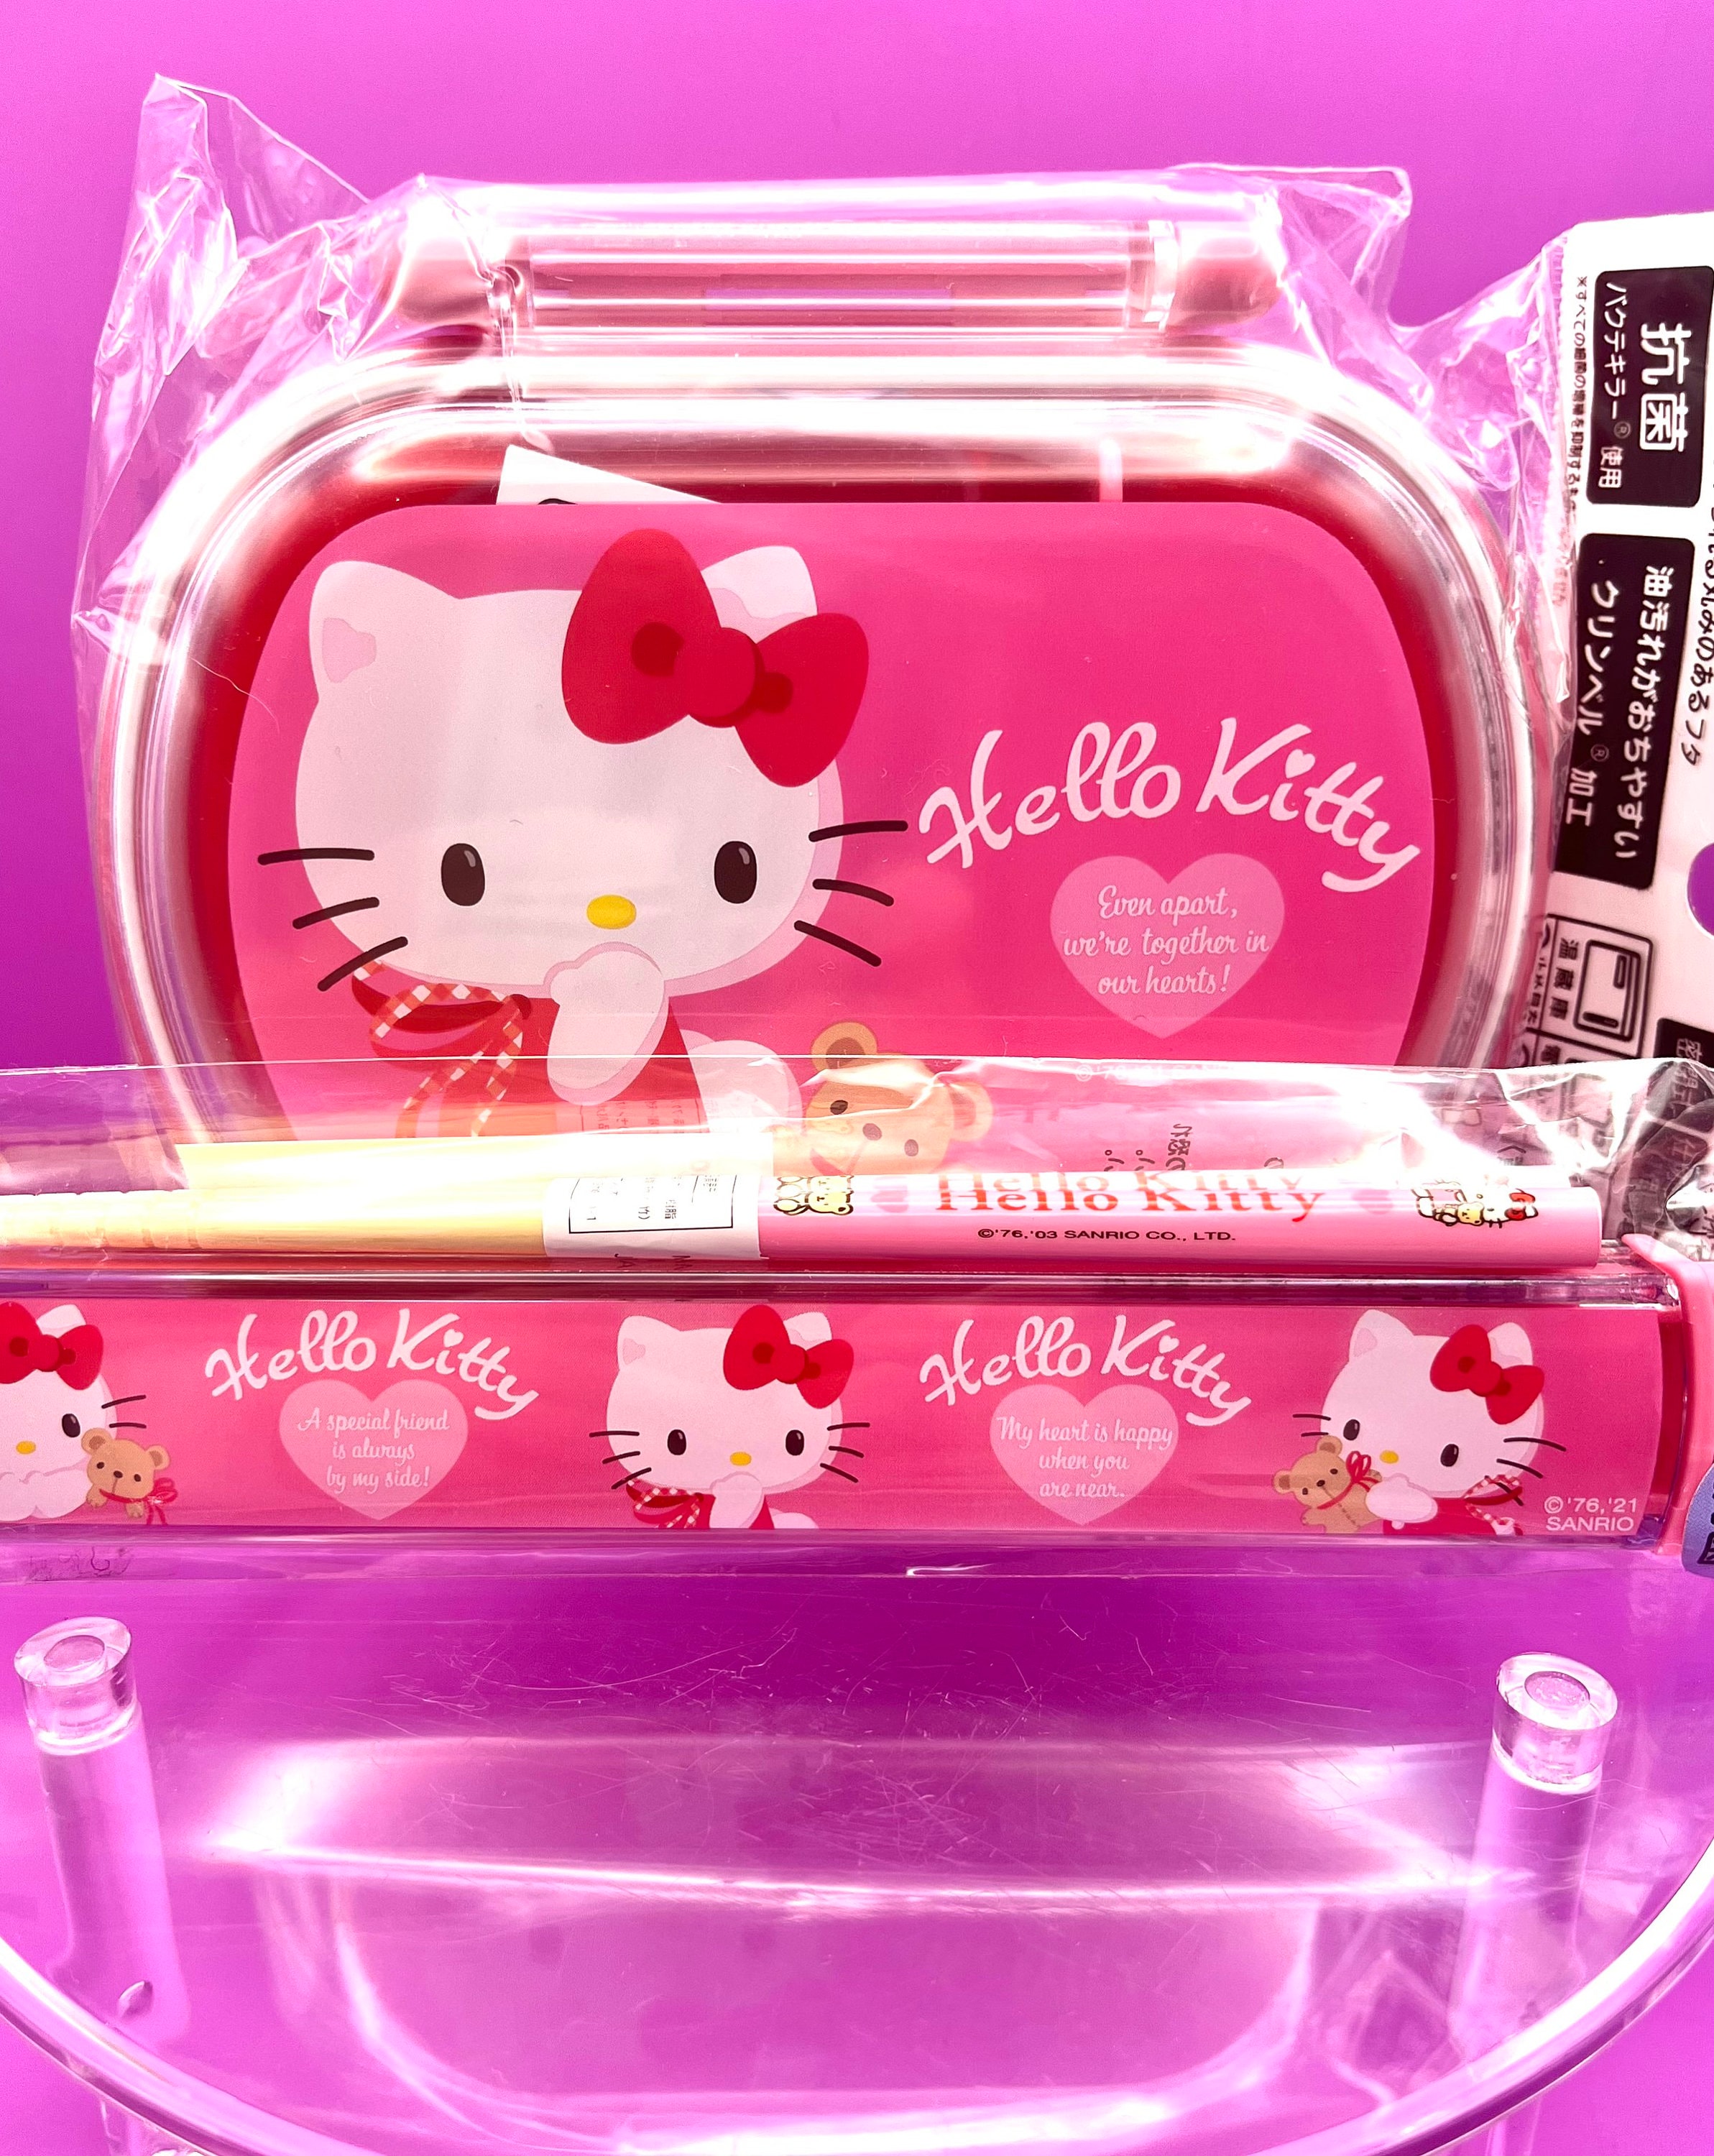 Hello Kitty Red Hearts Water Bottle with Cold Insulation Stick